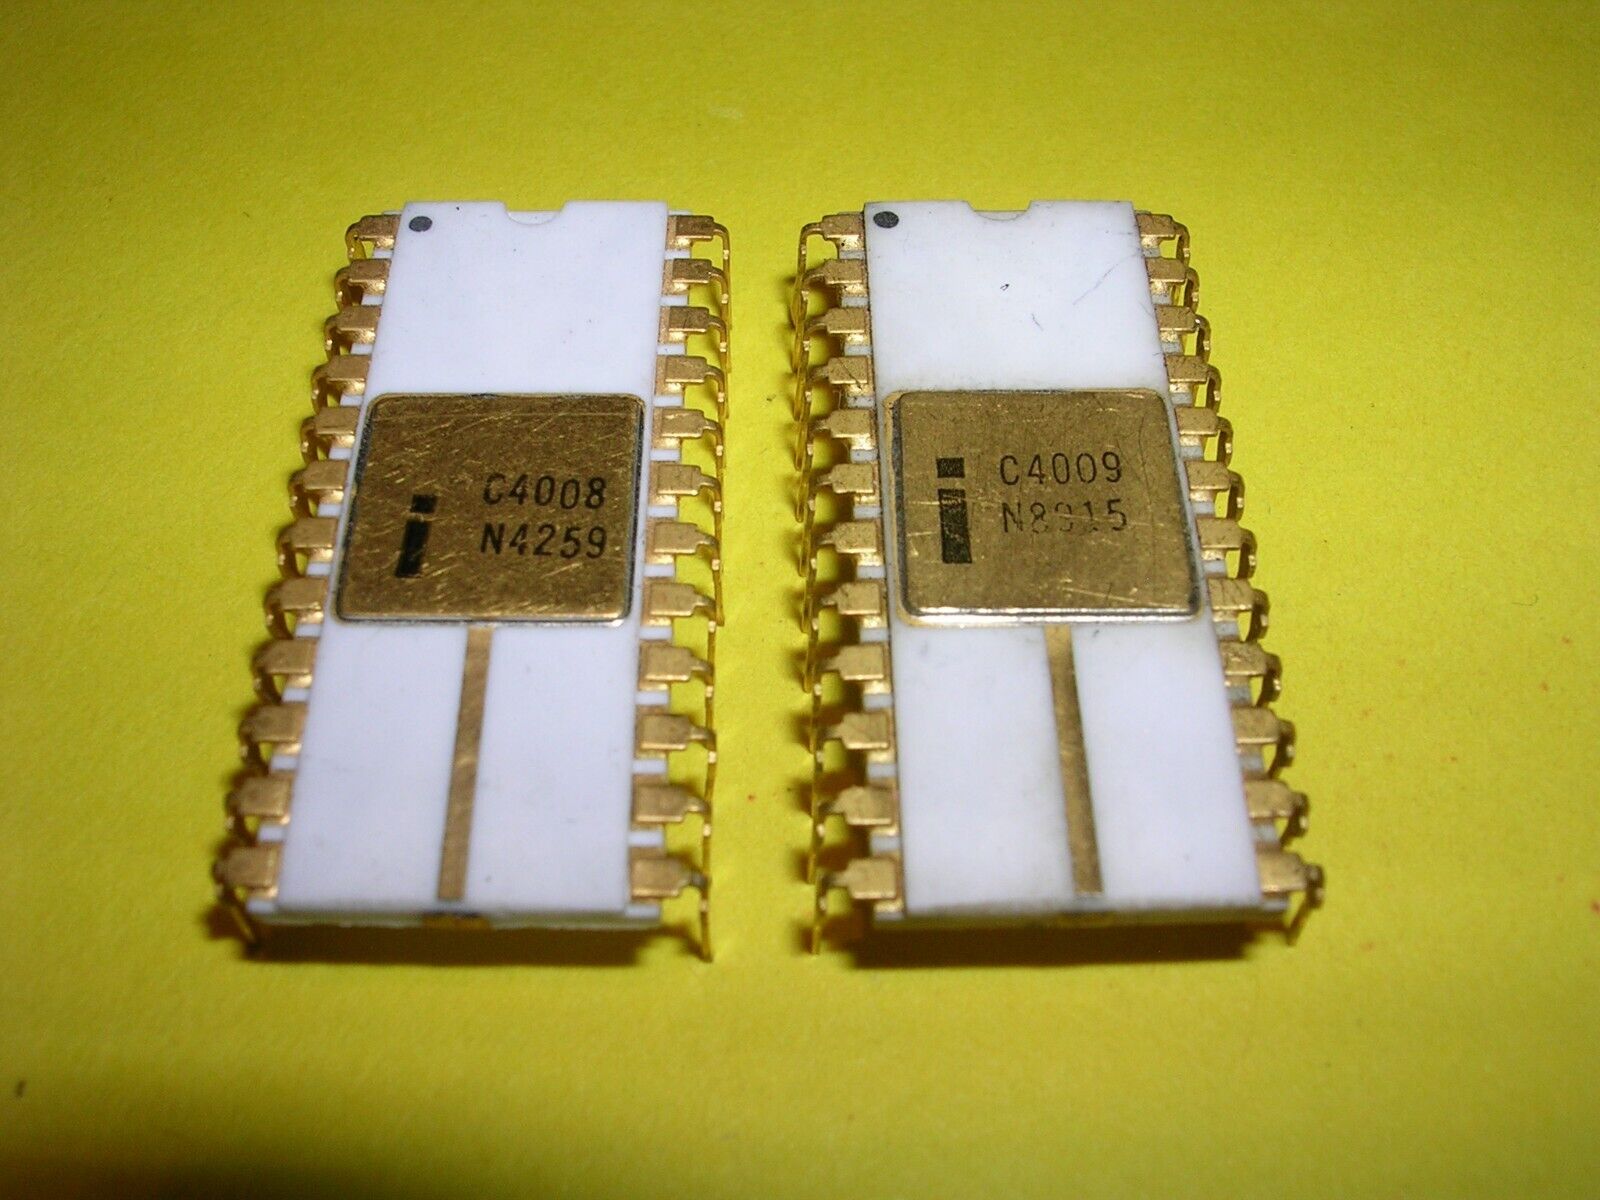 Intel C4008 / C4009 Pair - Standard Memory and I/O Interface for 4004 (C4004)